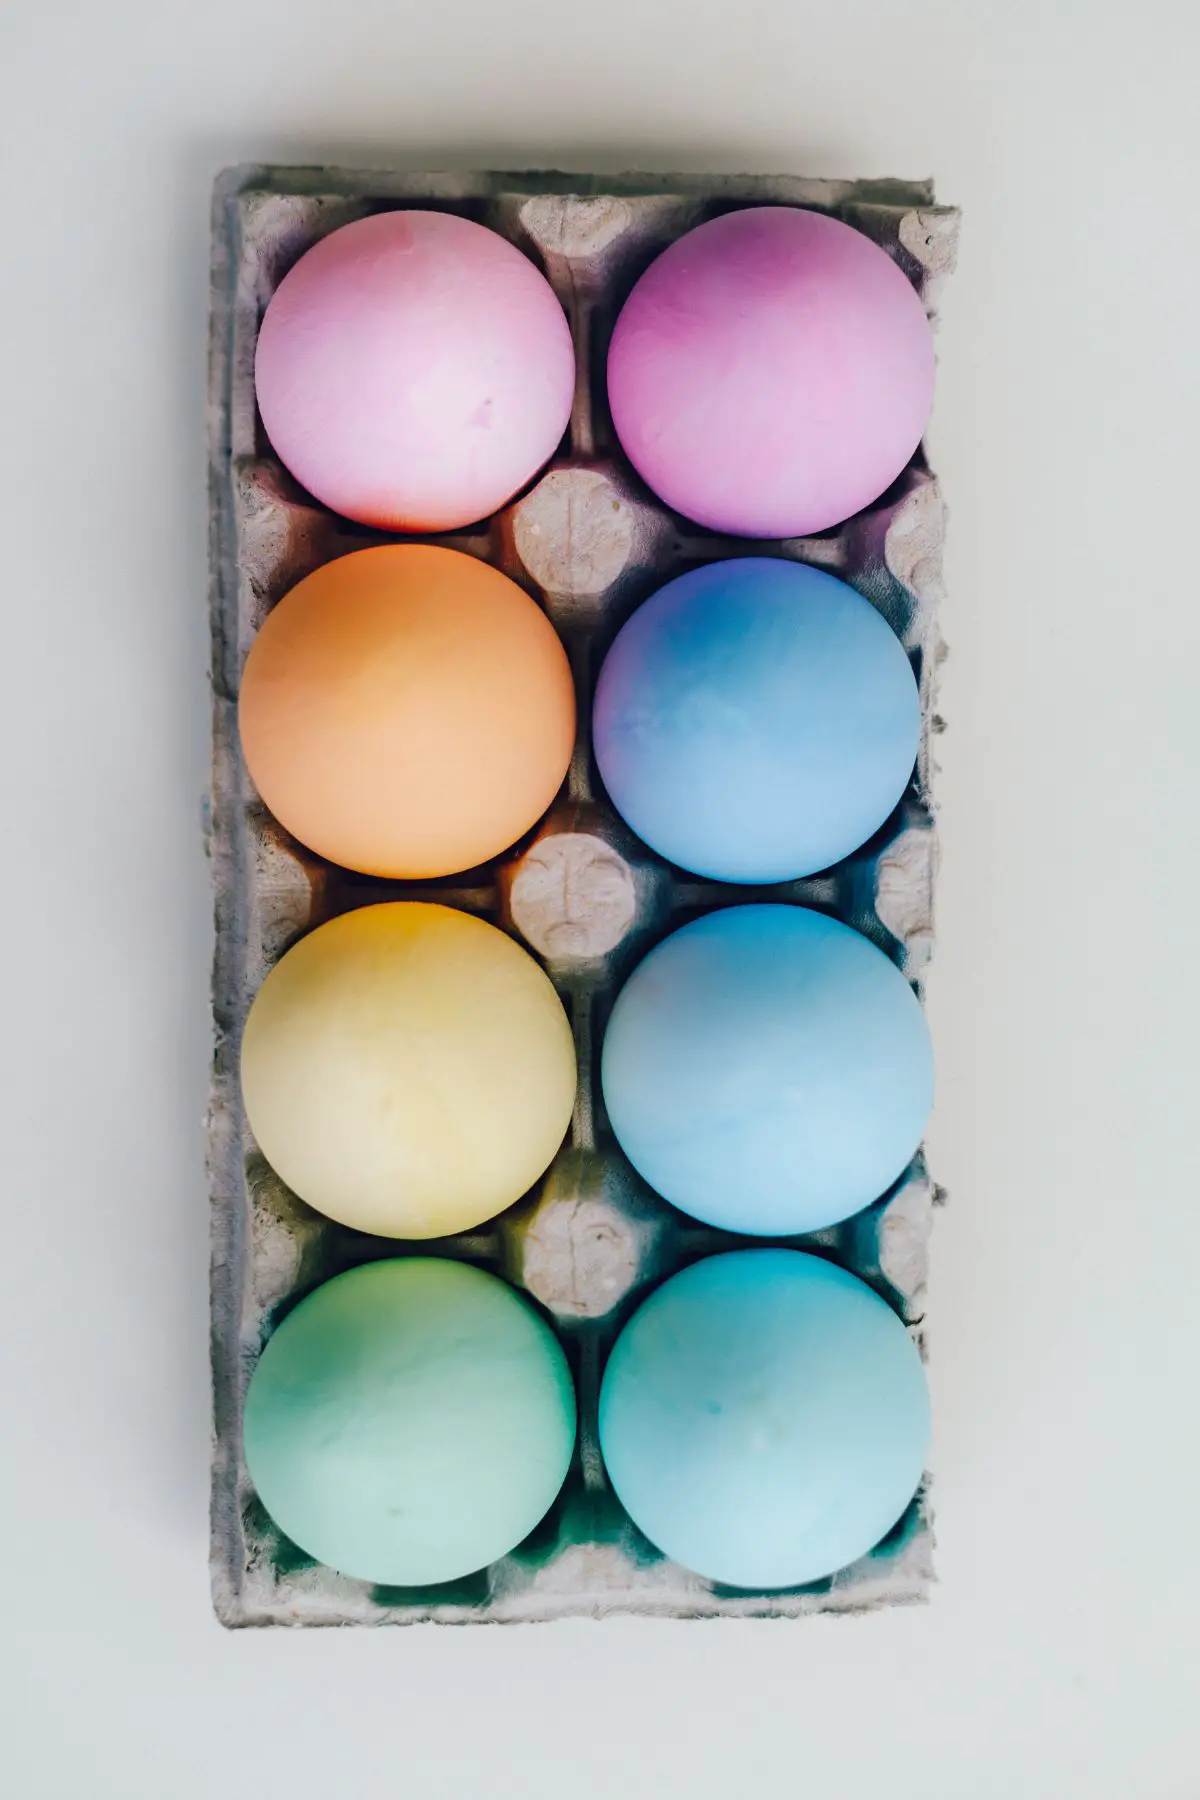 Eight colorful eggs in a carton.